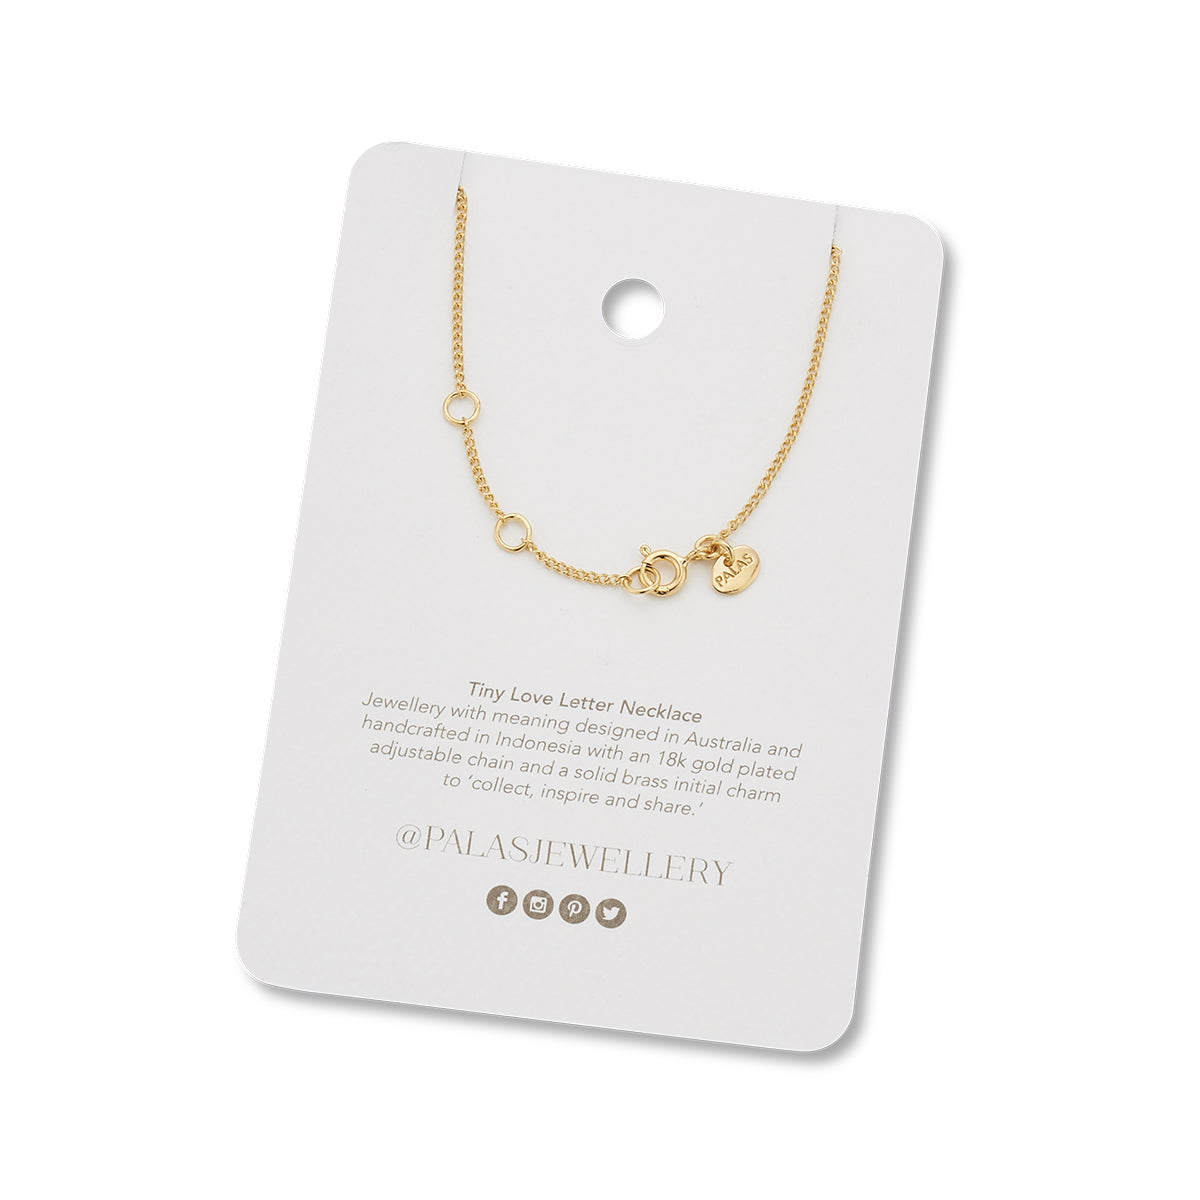 LOVE Tiny Love Letter Necklace 18k gold plated